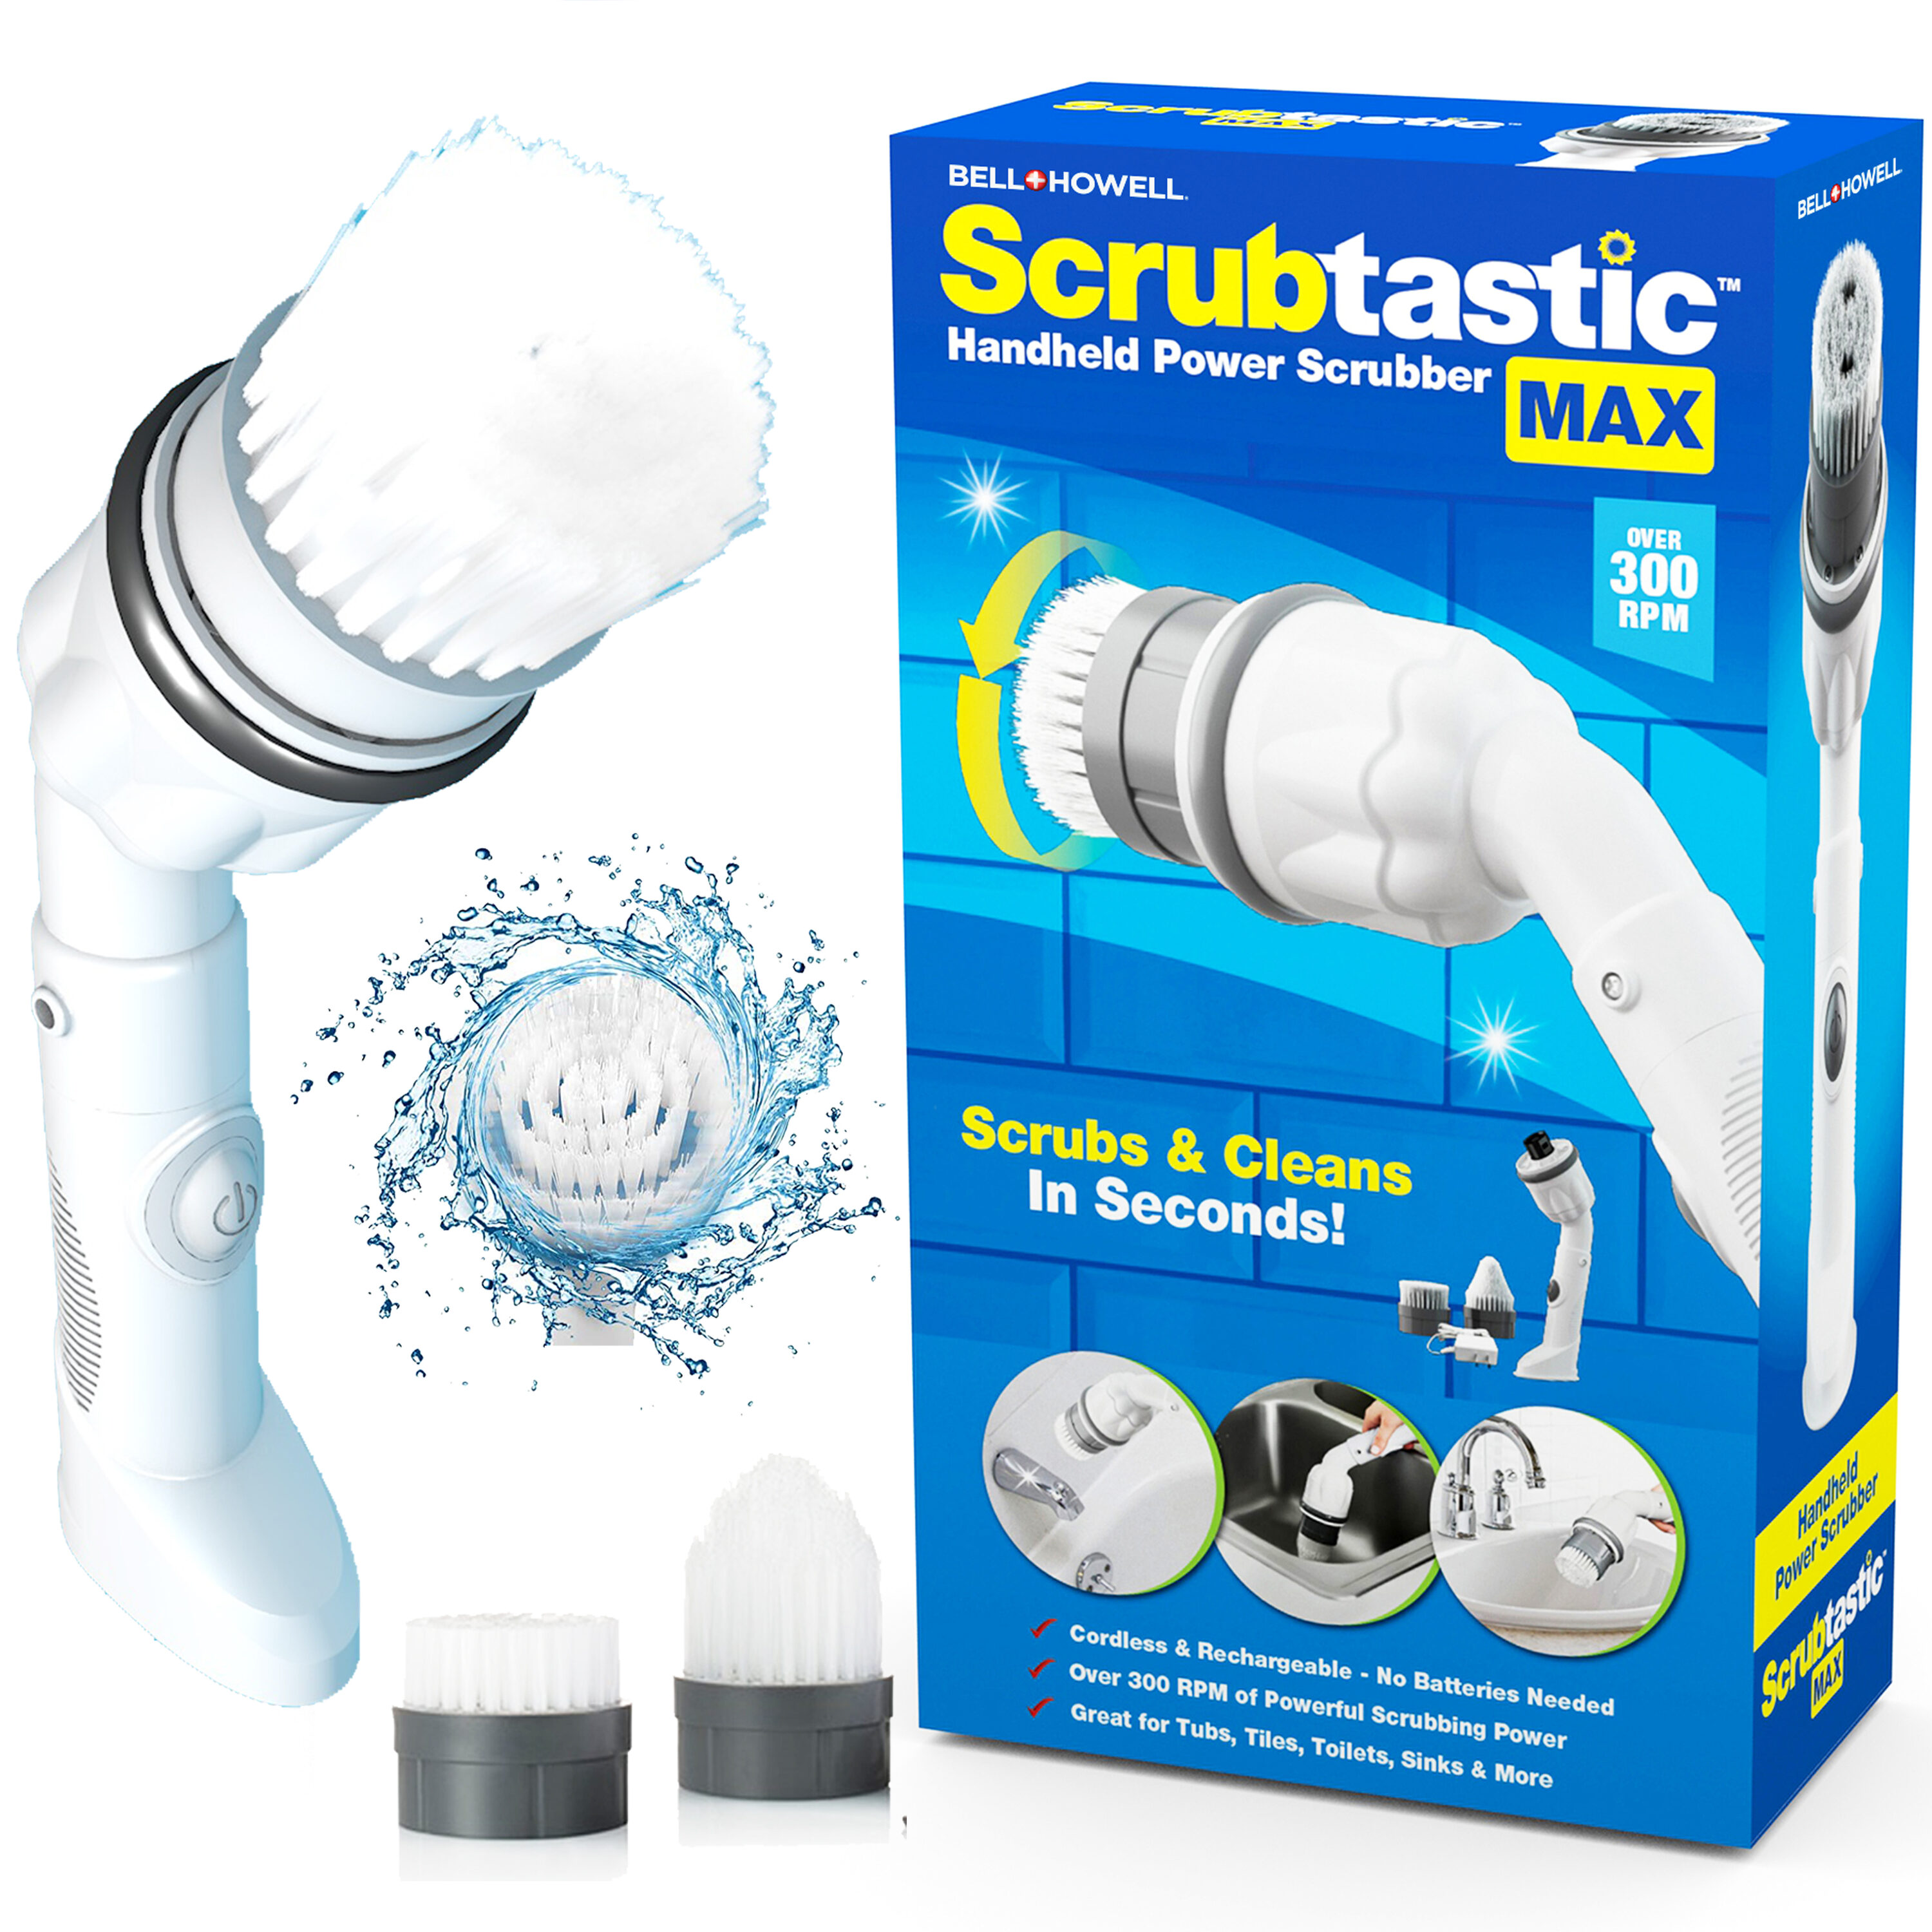 BELL + HOWELL Scrubtastic Max Spin Handheld Power Scrubber